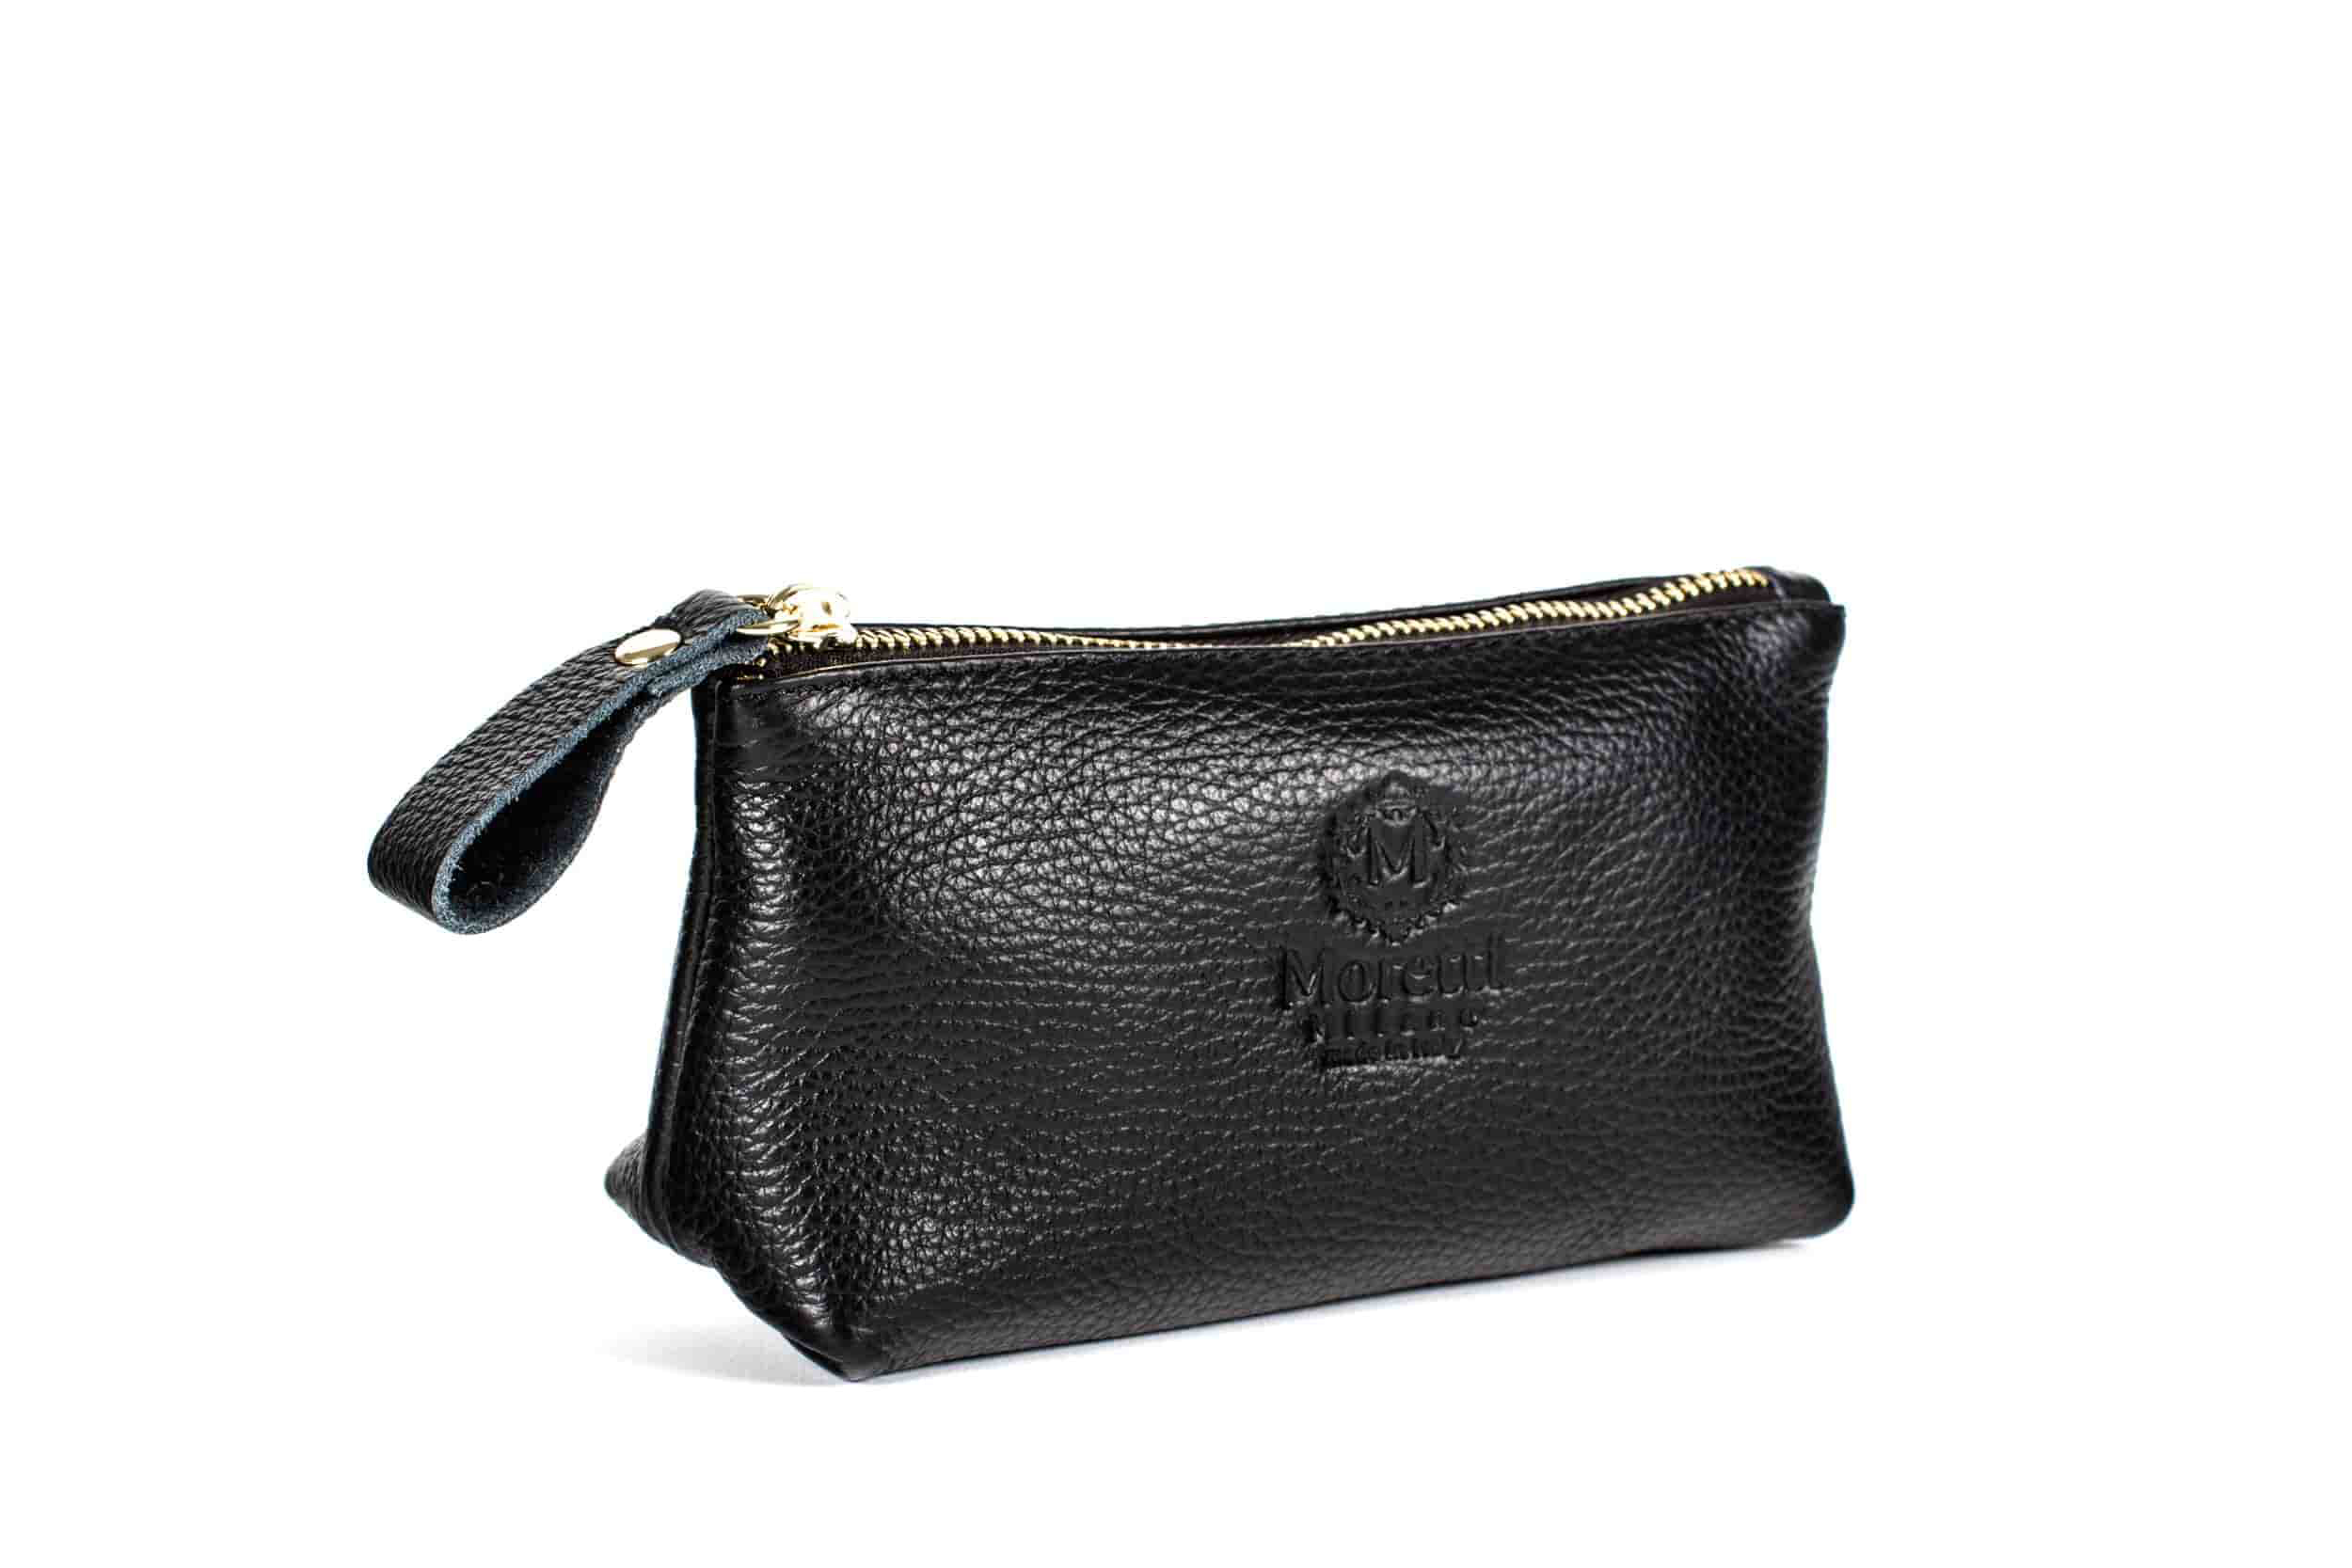 Leather Mini Clutch Petite Leather Makeup Bag Small -  Israel